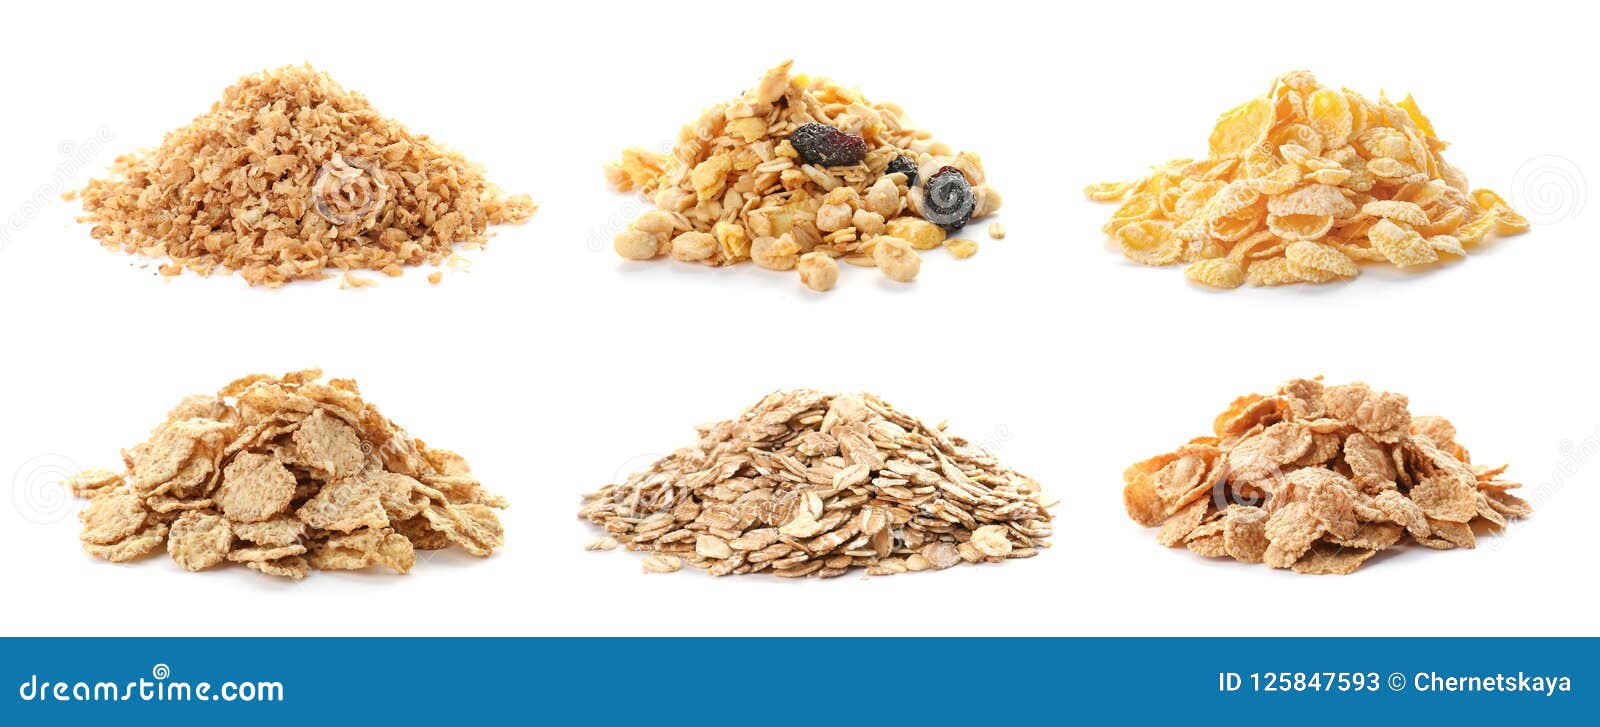 set with breakfast cereals on white background